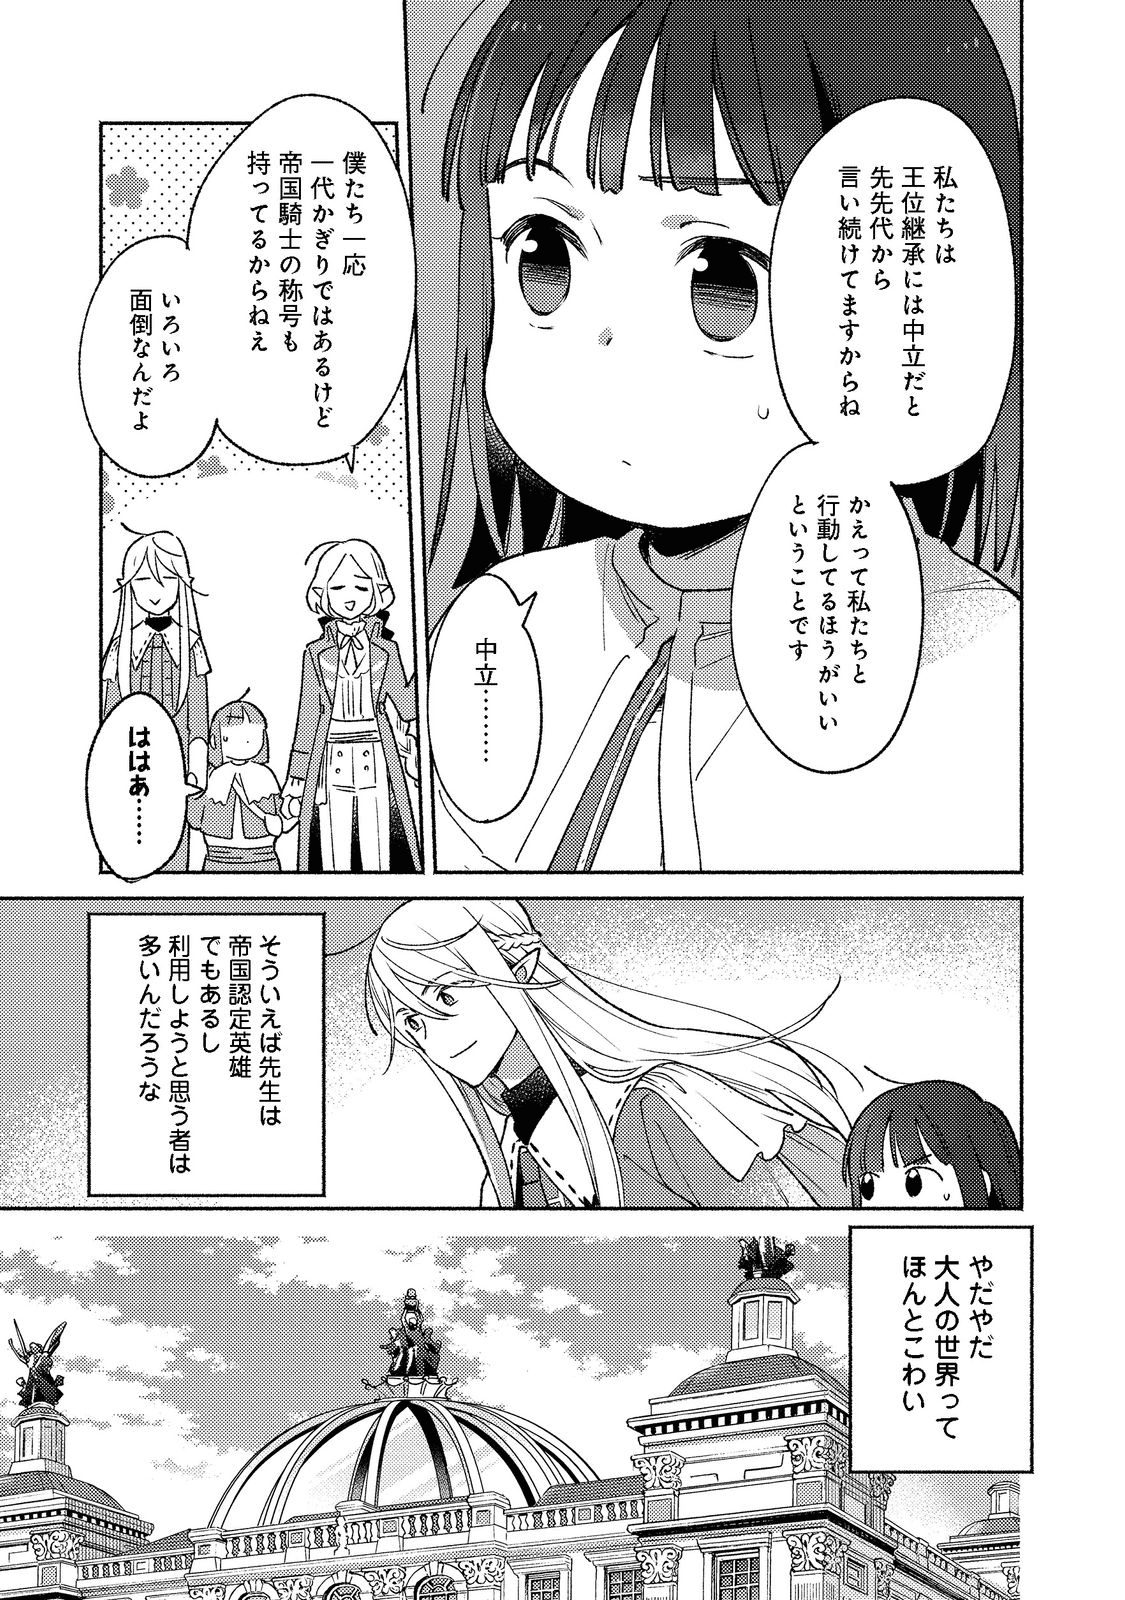 I’m the White Pig Nobleman 第15.1話 - Page 7